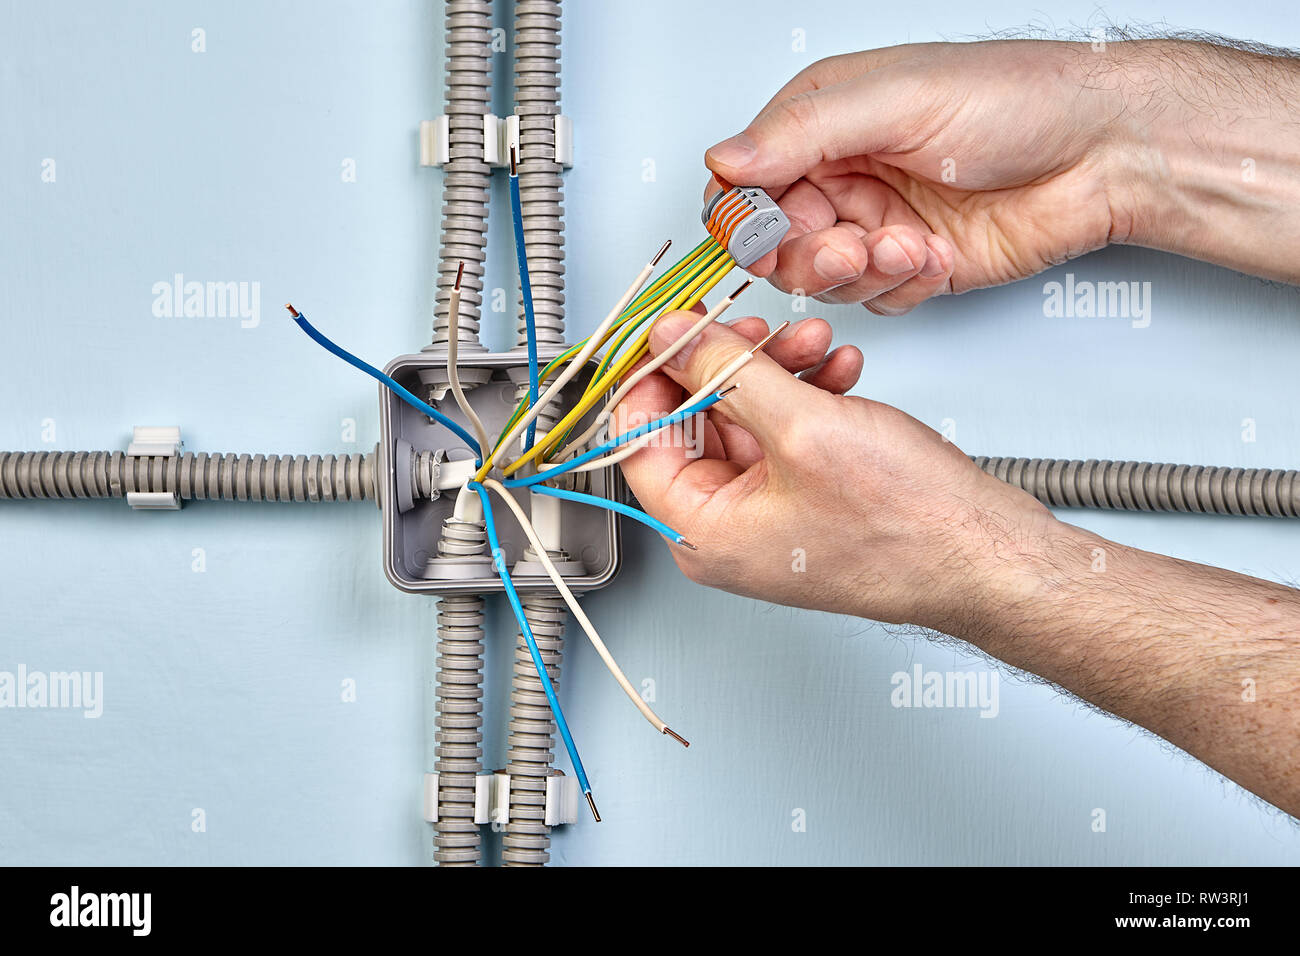 Electrician uses spring terminals to bind wires together durind mounting electrical junction box. Stock Photo